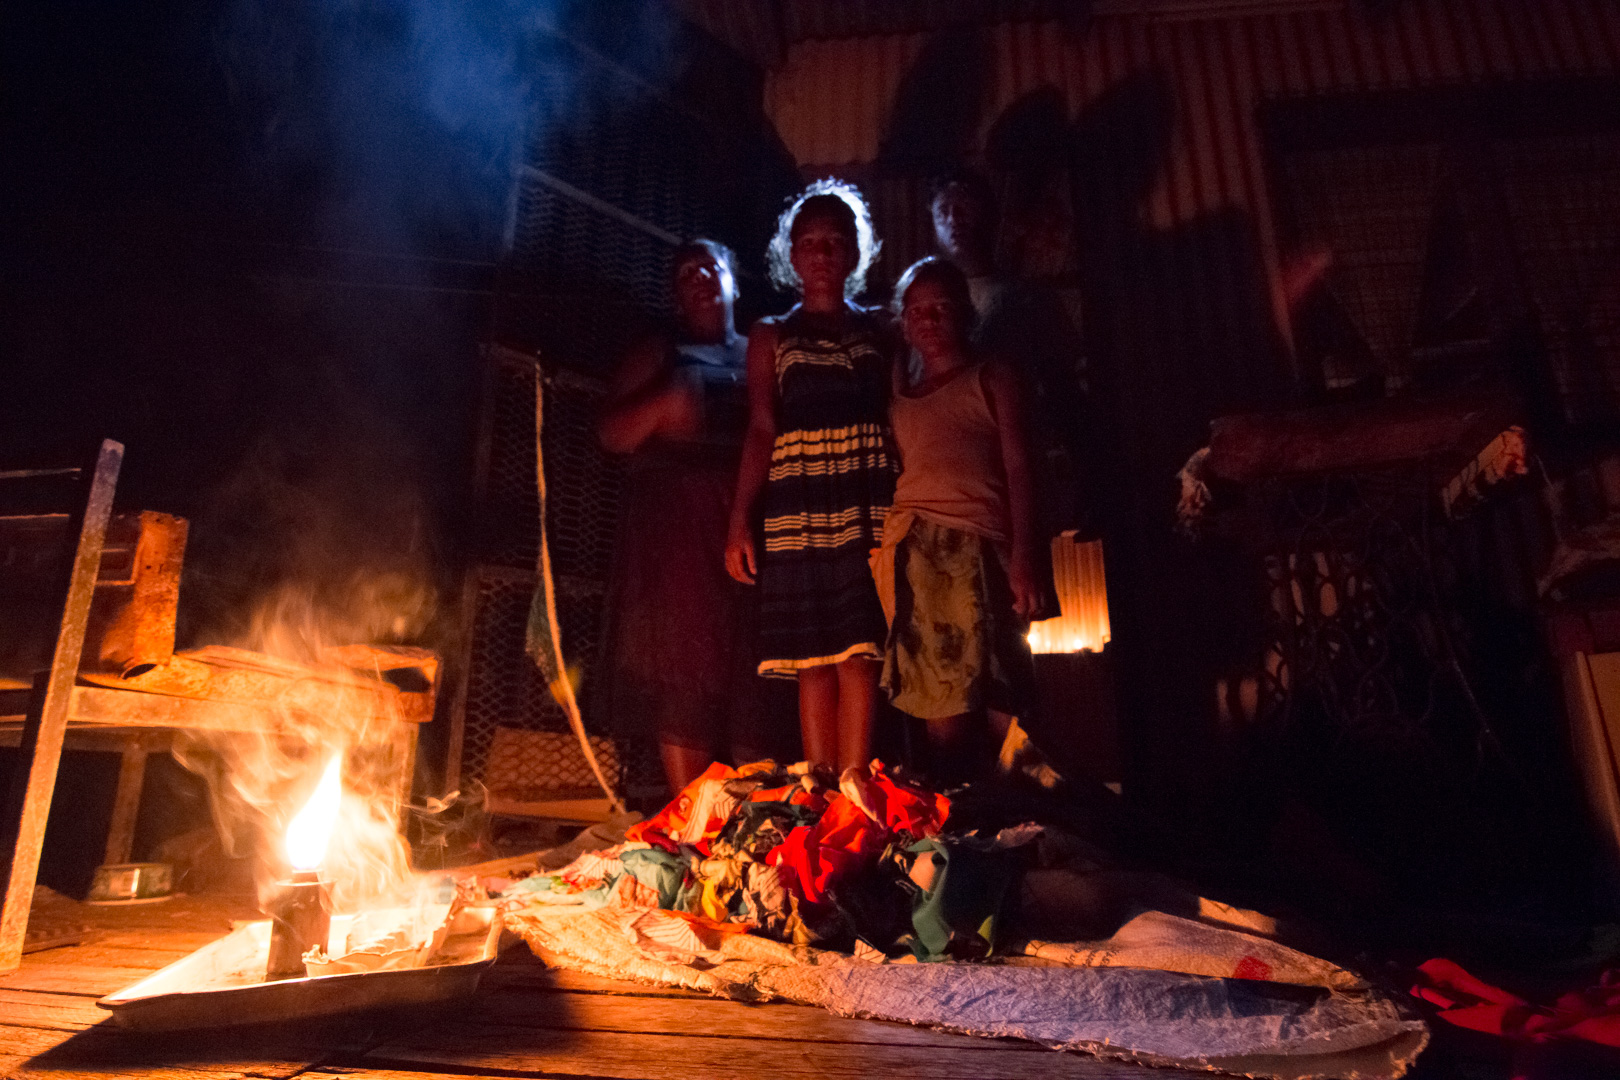  A family in Nausori spend the evening together without electricity due to nationwide power shortages caused after Cyclone Winston swept through the area and made landfall in Fiji on February 20, 2016. 